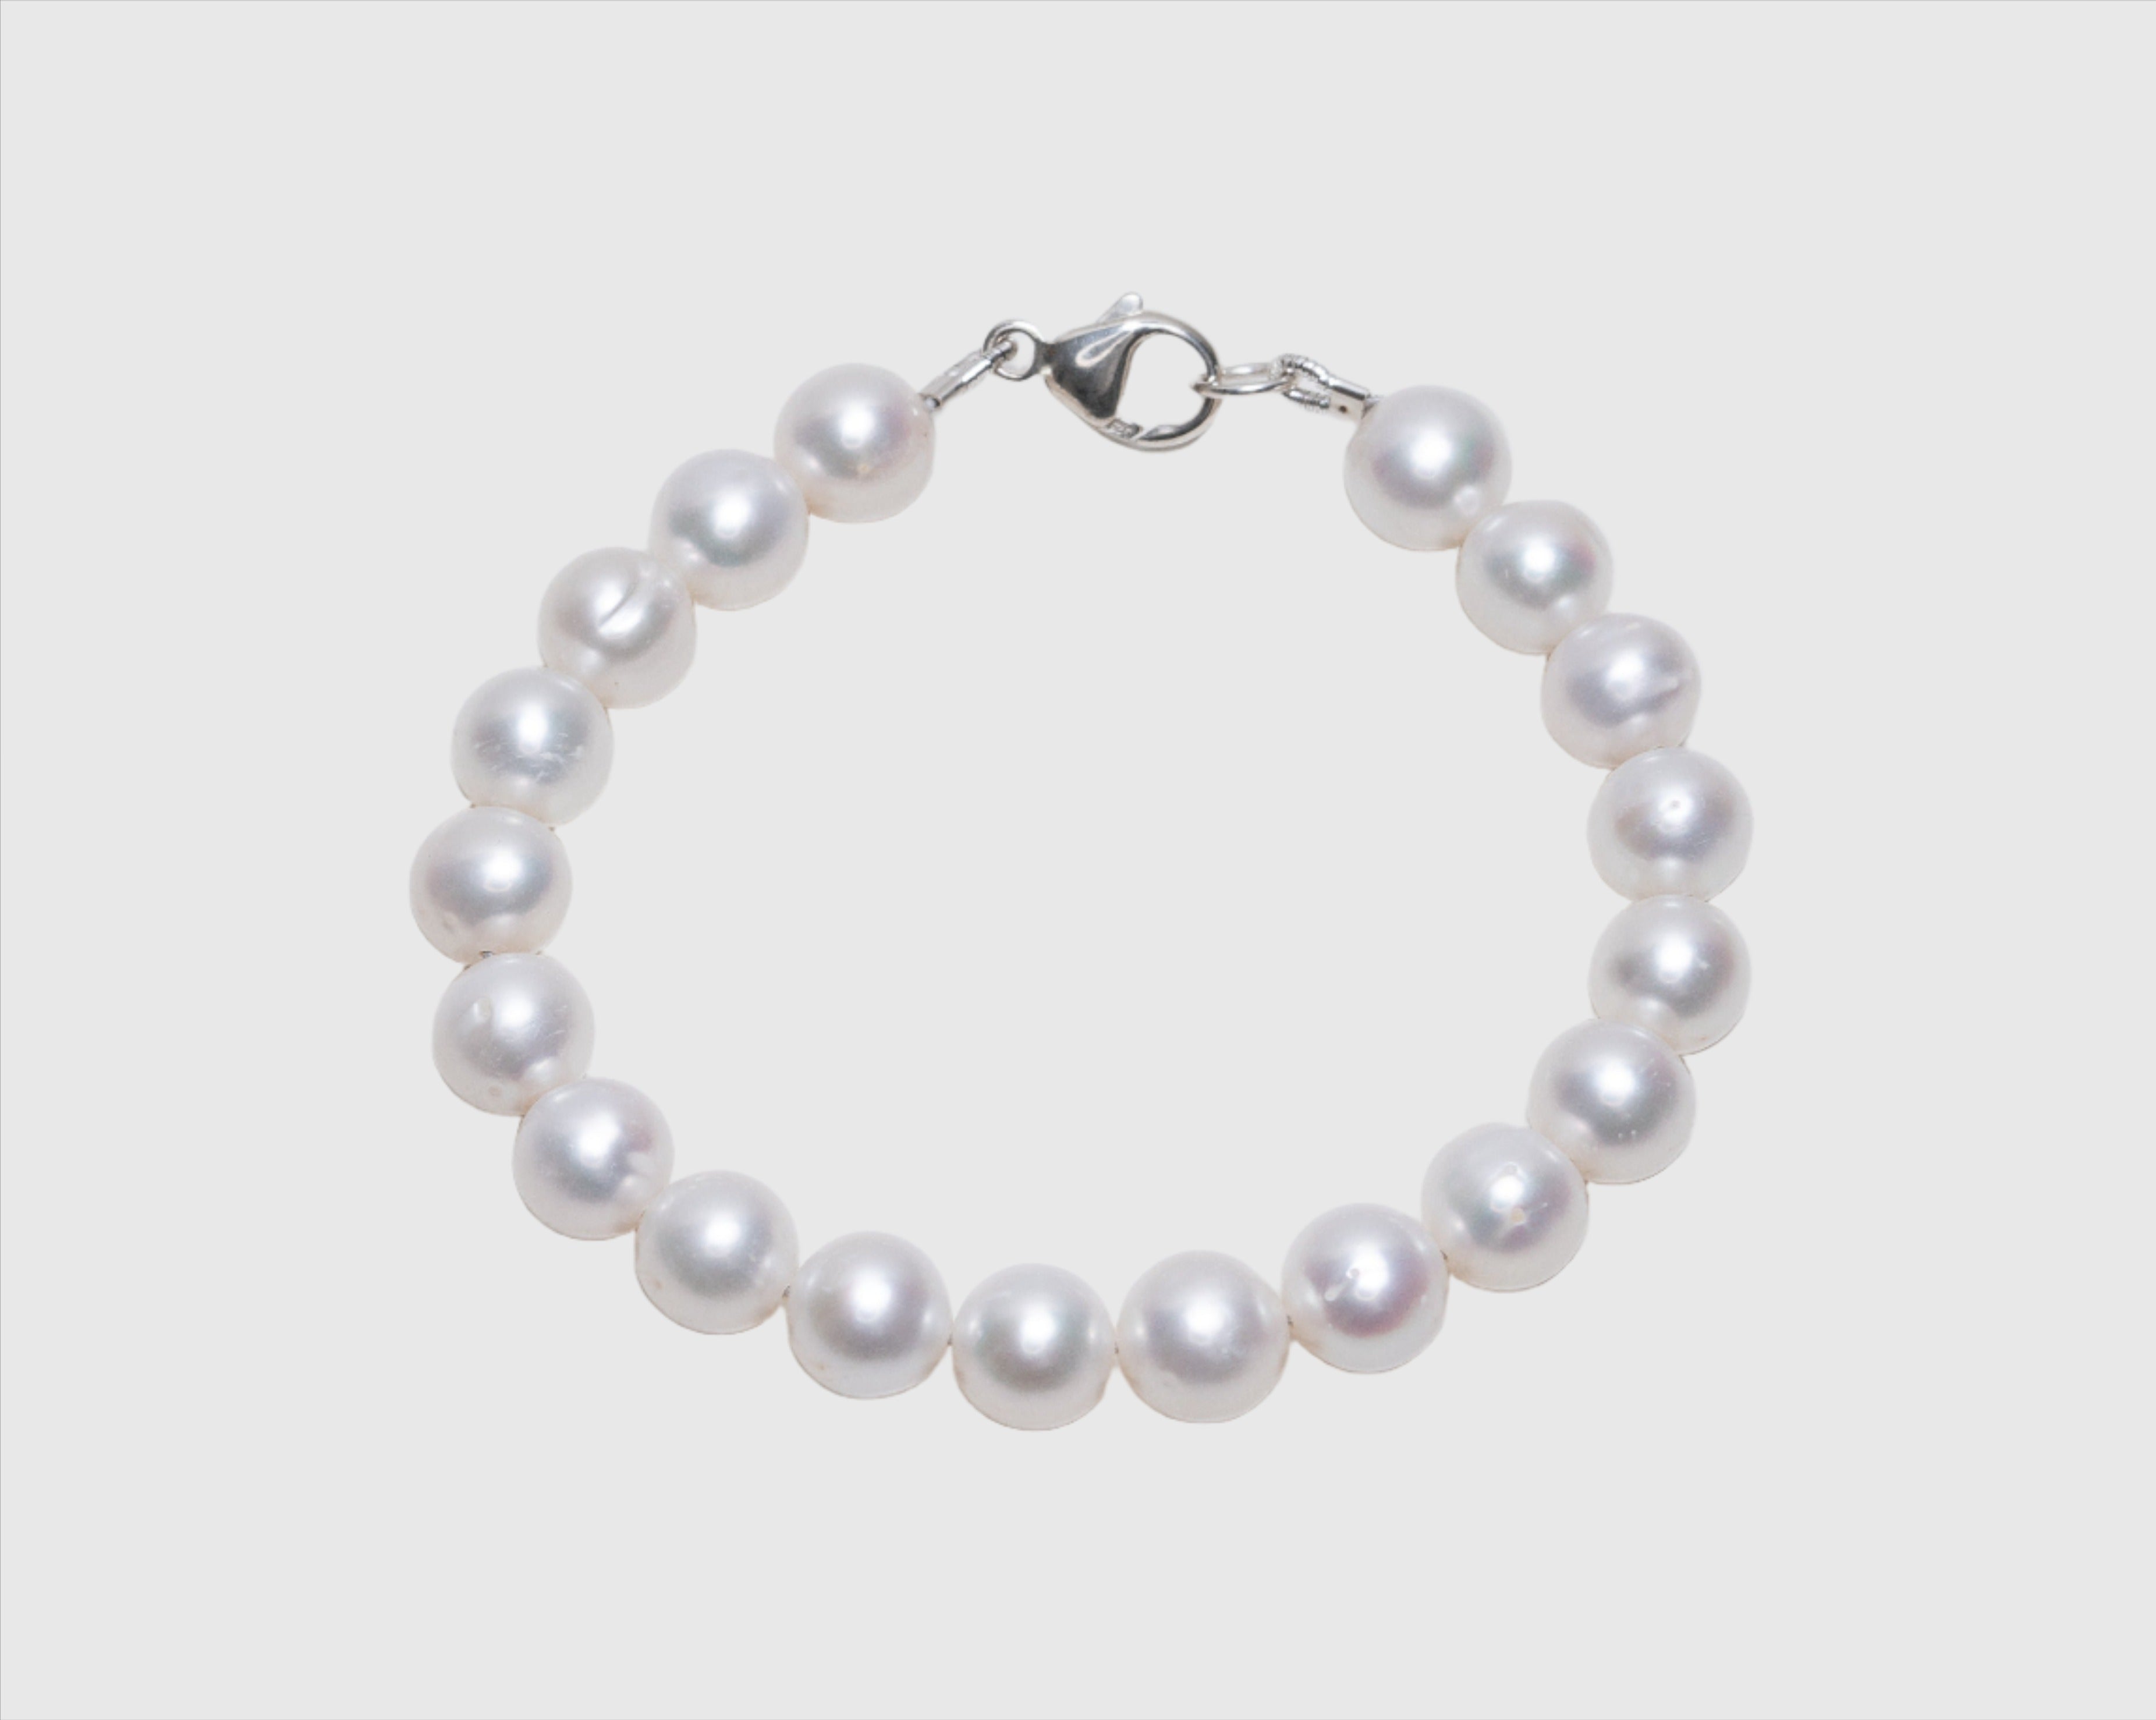 Baby Baroque pearl and silver bracelet – Barb McSweeney Jewelry